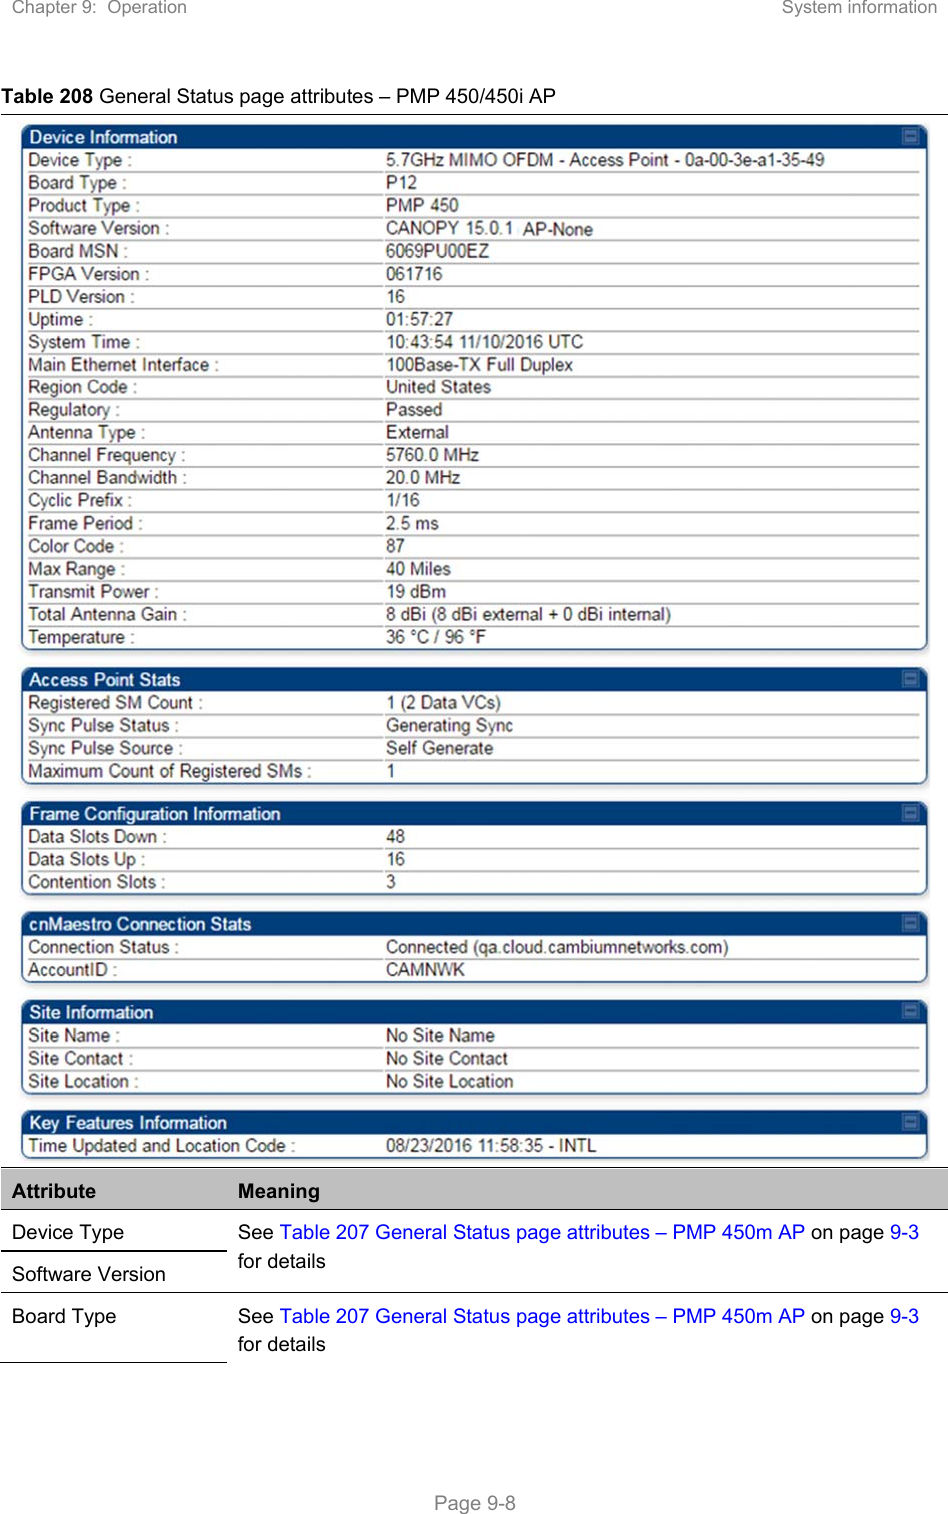 Chapter 9:  Operation  System information   Page 9-8 Table 208 General Status page attributes – PMP 450/450i AP    Attribute  Meaning Device Type  See Table 207 General Status page attributes – PMP 450m AP on page 9-3 for details Software Version Board Type  See Table 207 General Status page attributes – PMP 450m AP on page 9-3 for details 